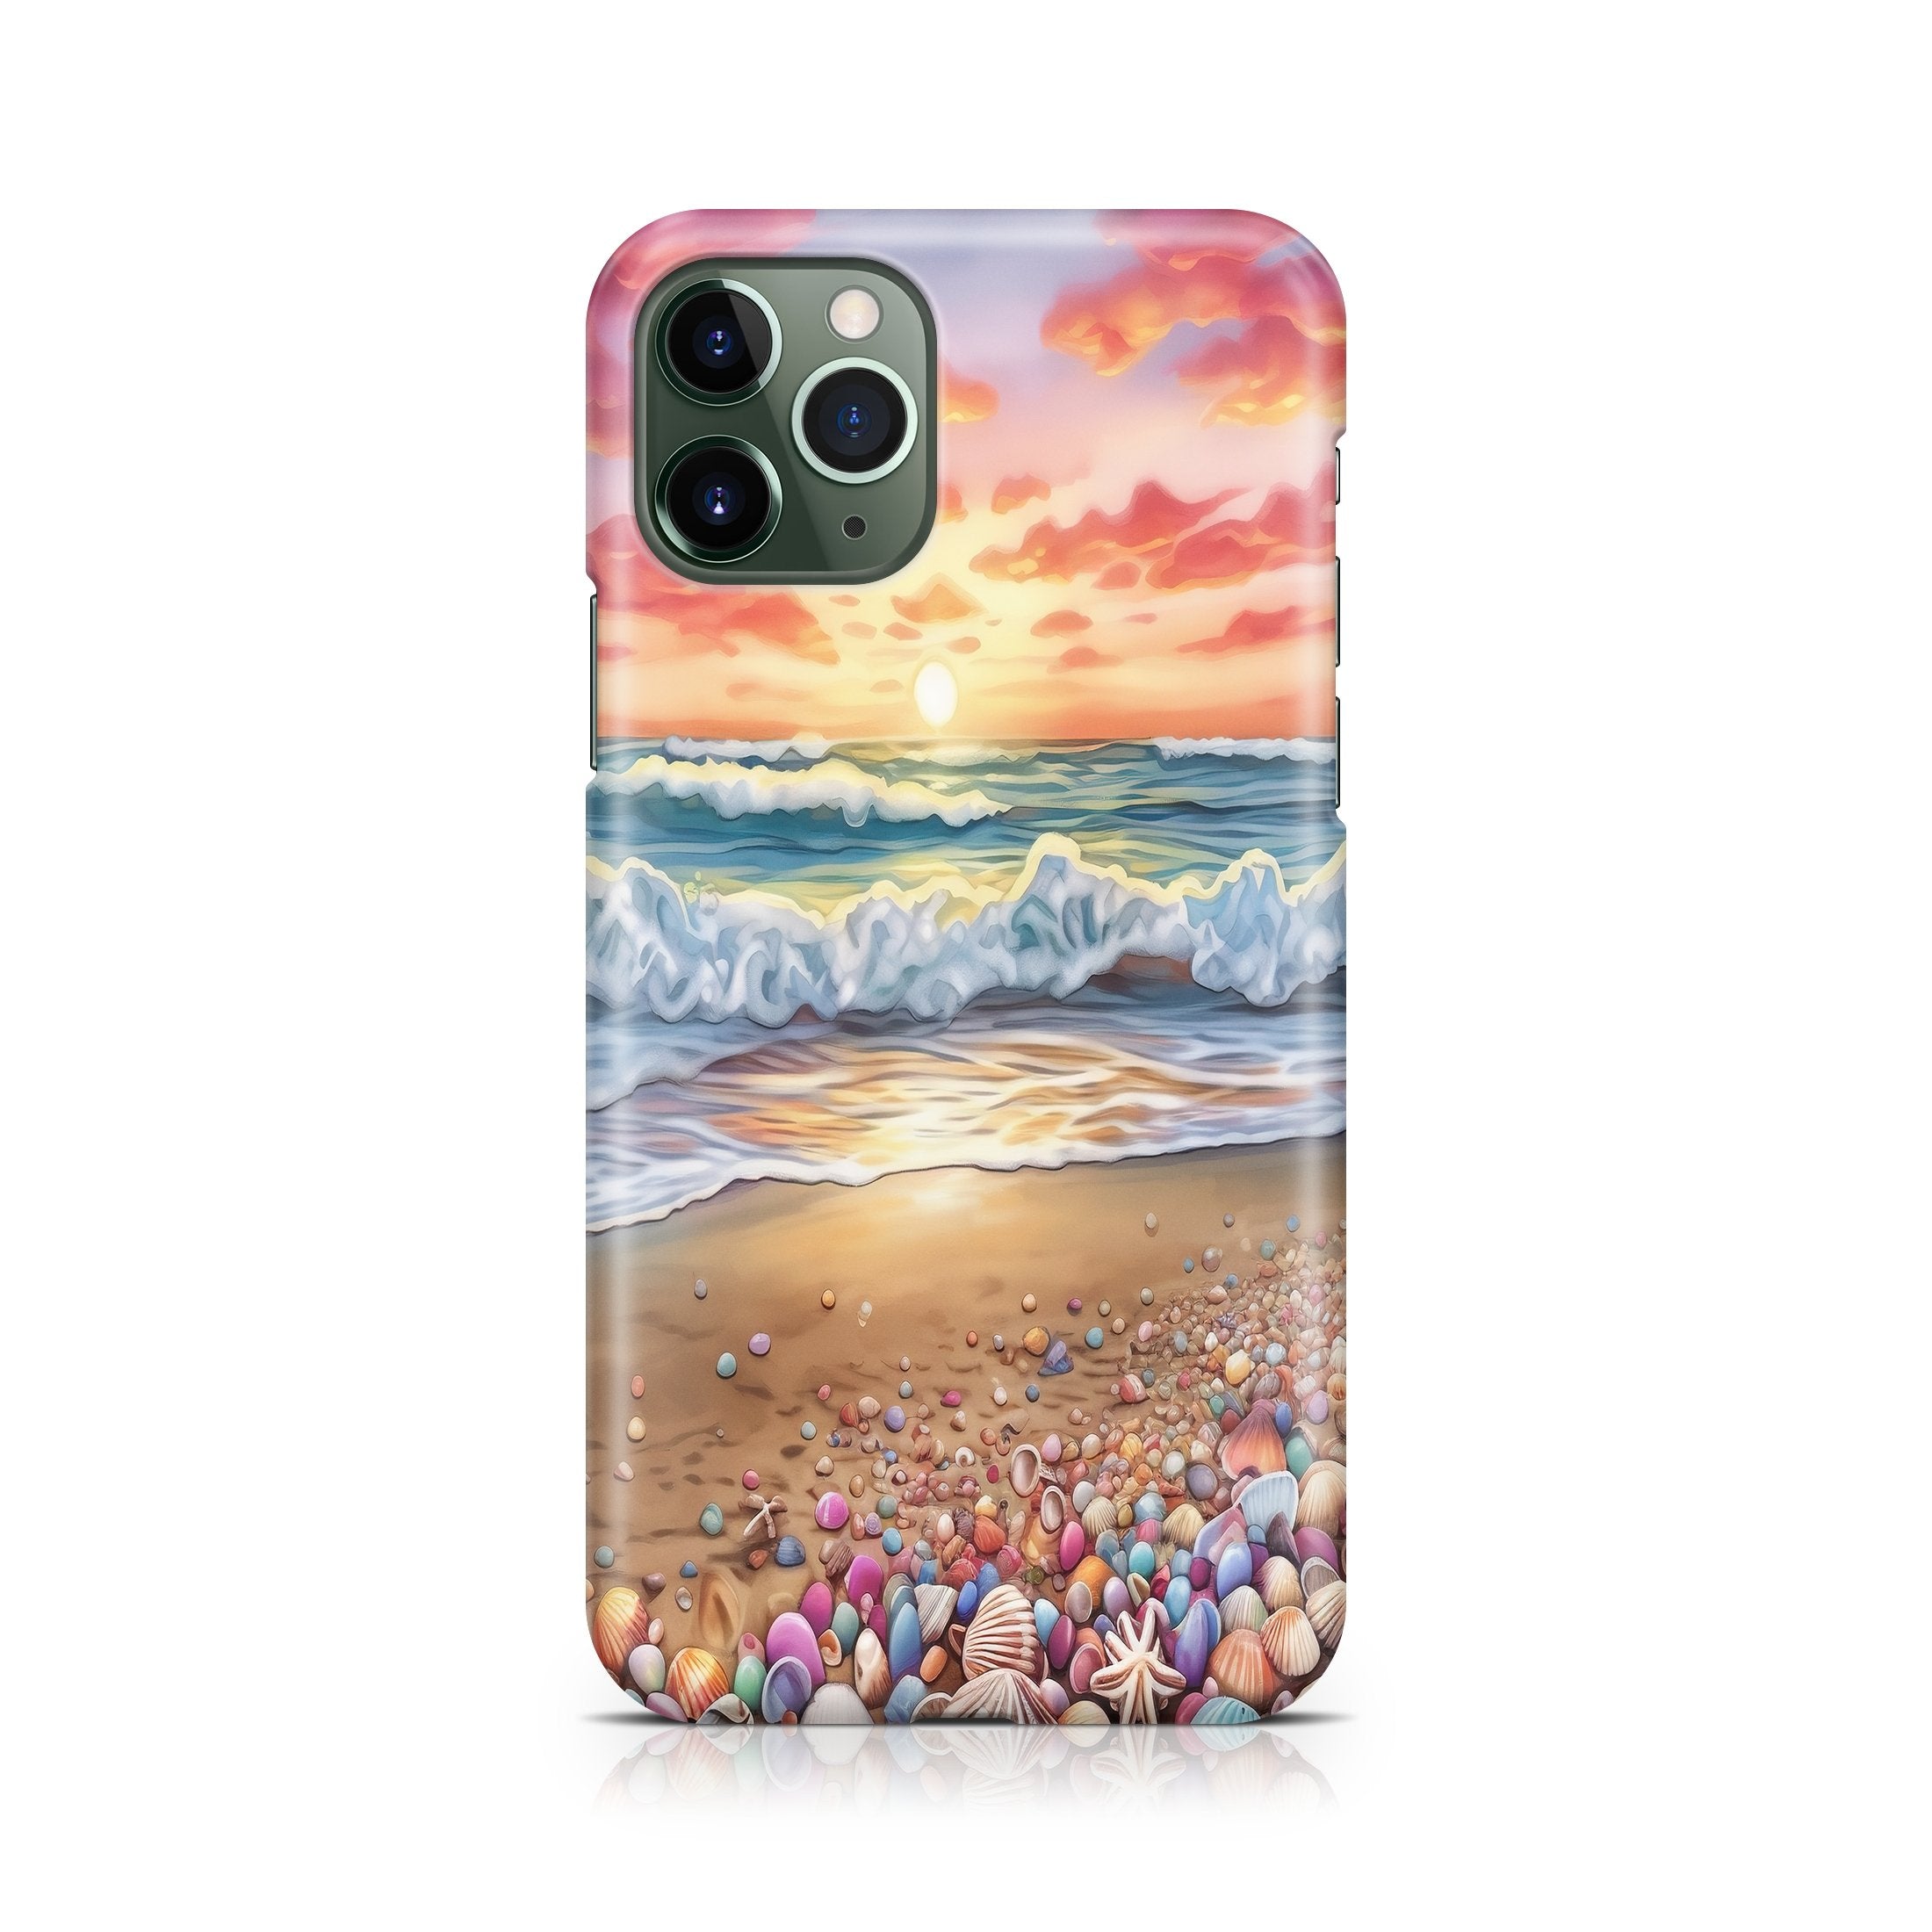 Summertime Shoreline - iPhone phone case designs by CaseSwagger